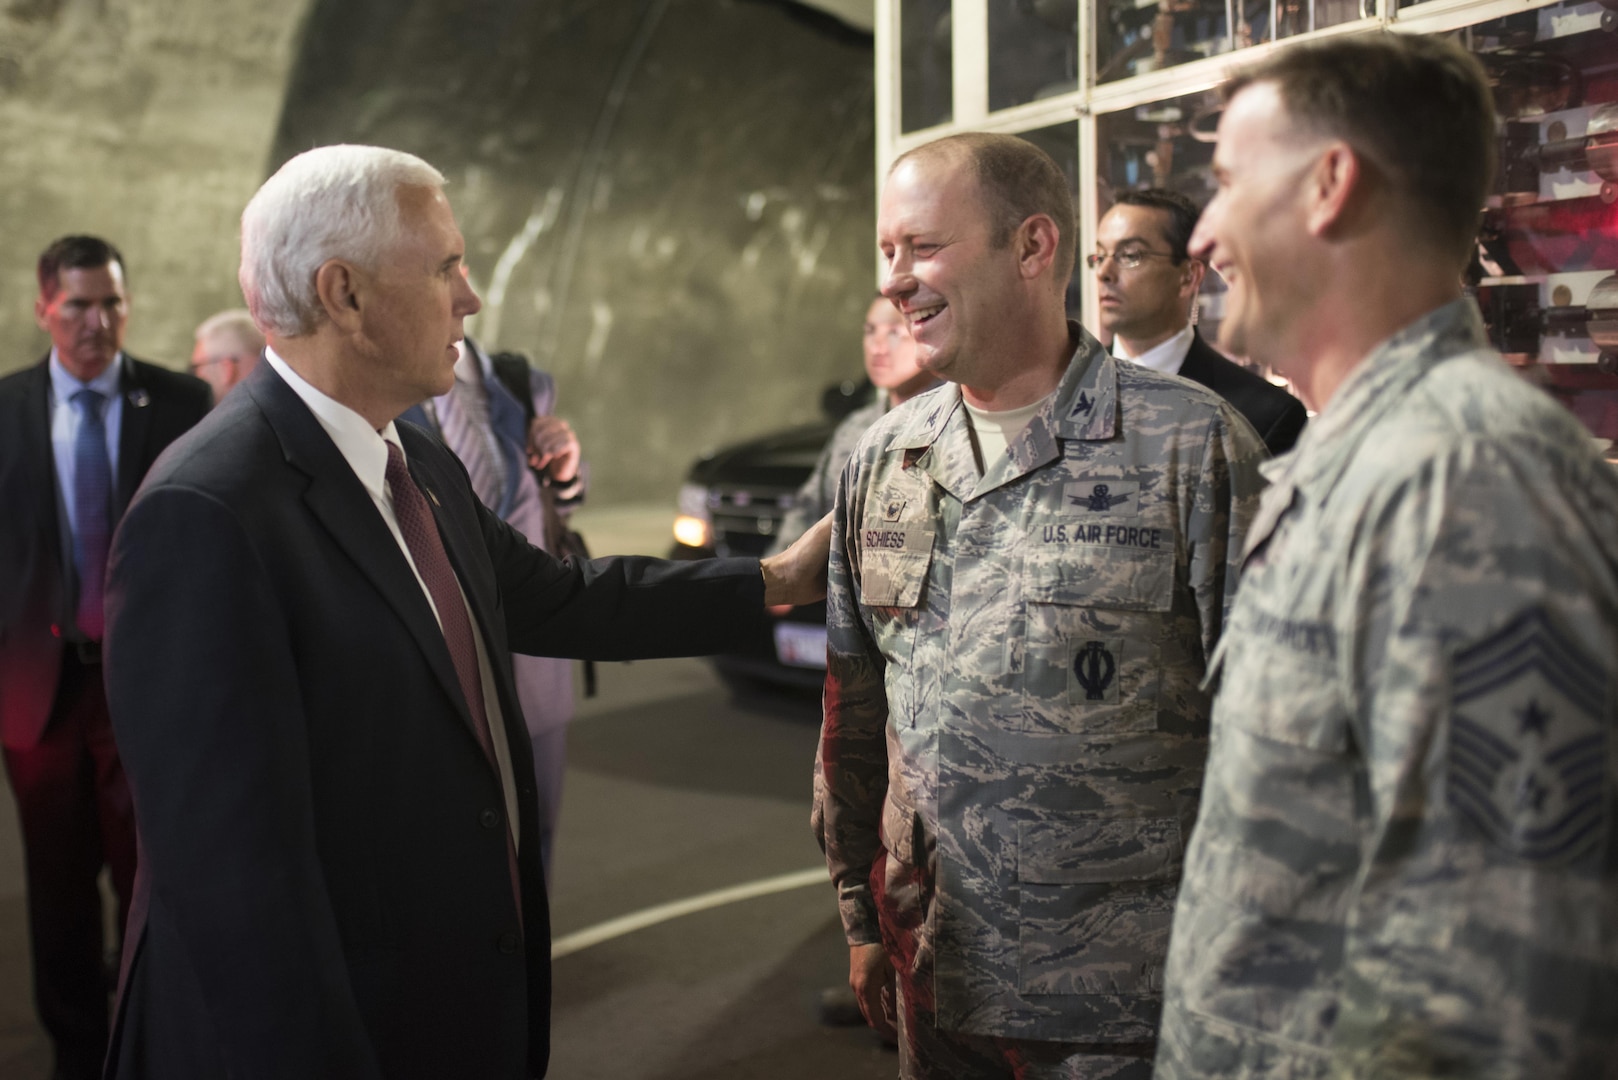 CHEYENNE MOUNTAIN AIR FORCE STATION, Colo. - Vice President Mike Pence
speaks with Col. Doug Schiess, 21st Space Wing commander, and Chief Master
Sgt. Mark Bronson, 21st SW command chief, during his visit to Cheyenne
Mountain Air Force Station, Colo., June 23, 2017.  It has been 34 years
since the last visit by the vice president of the United States. (U.S. Air
Force photo by Senior Airman Dennis Hoffman)